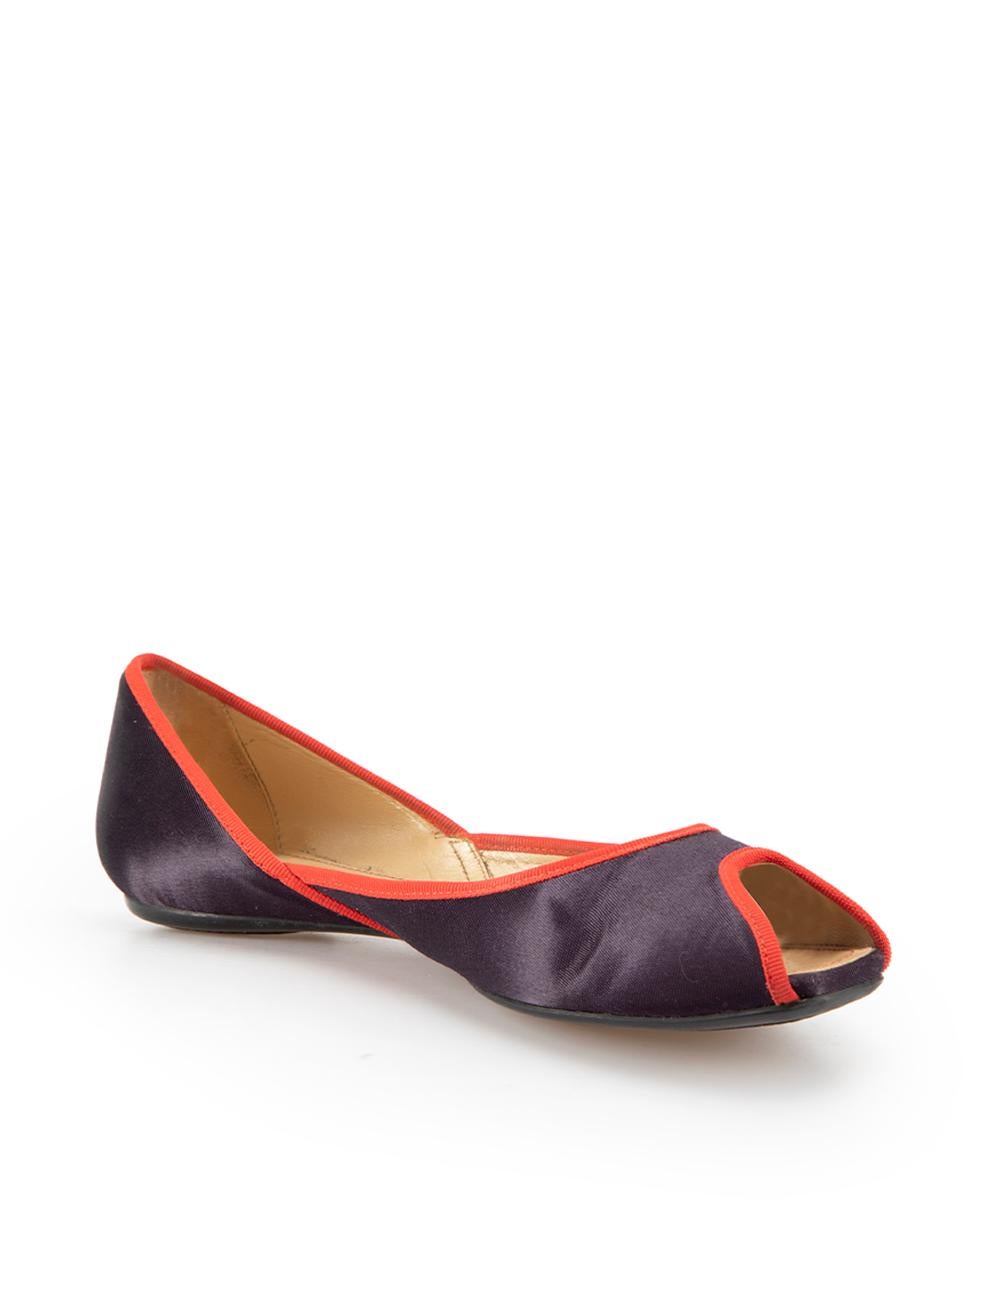 CONDITION is Very good. Minimal wear to flats is evident. Minimal wear to exterior satin material where slight creasing and scratch due to wear is evident on this used Hogan designer resale item.
  
  Details
  Purple
  Satin
  Flats
  Peep toe
 